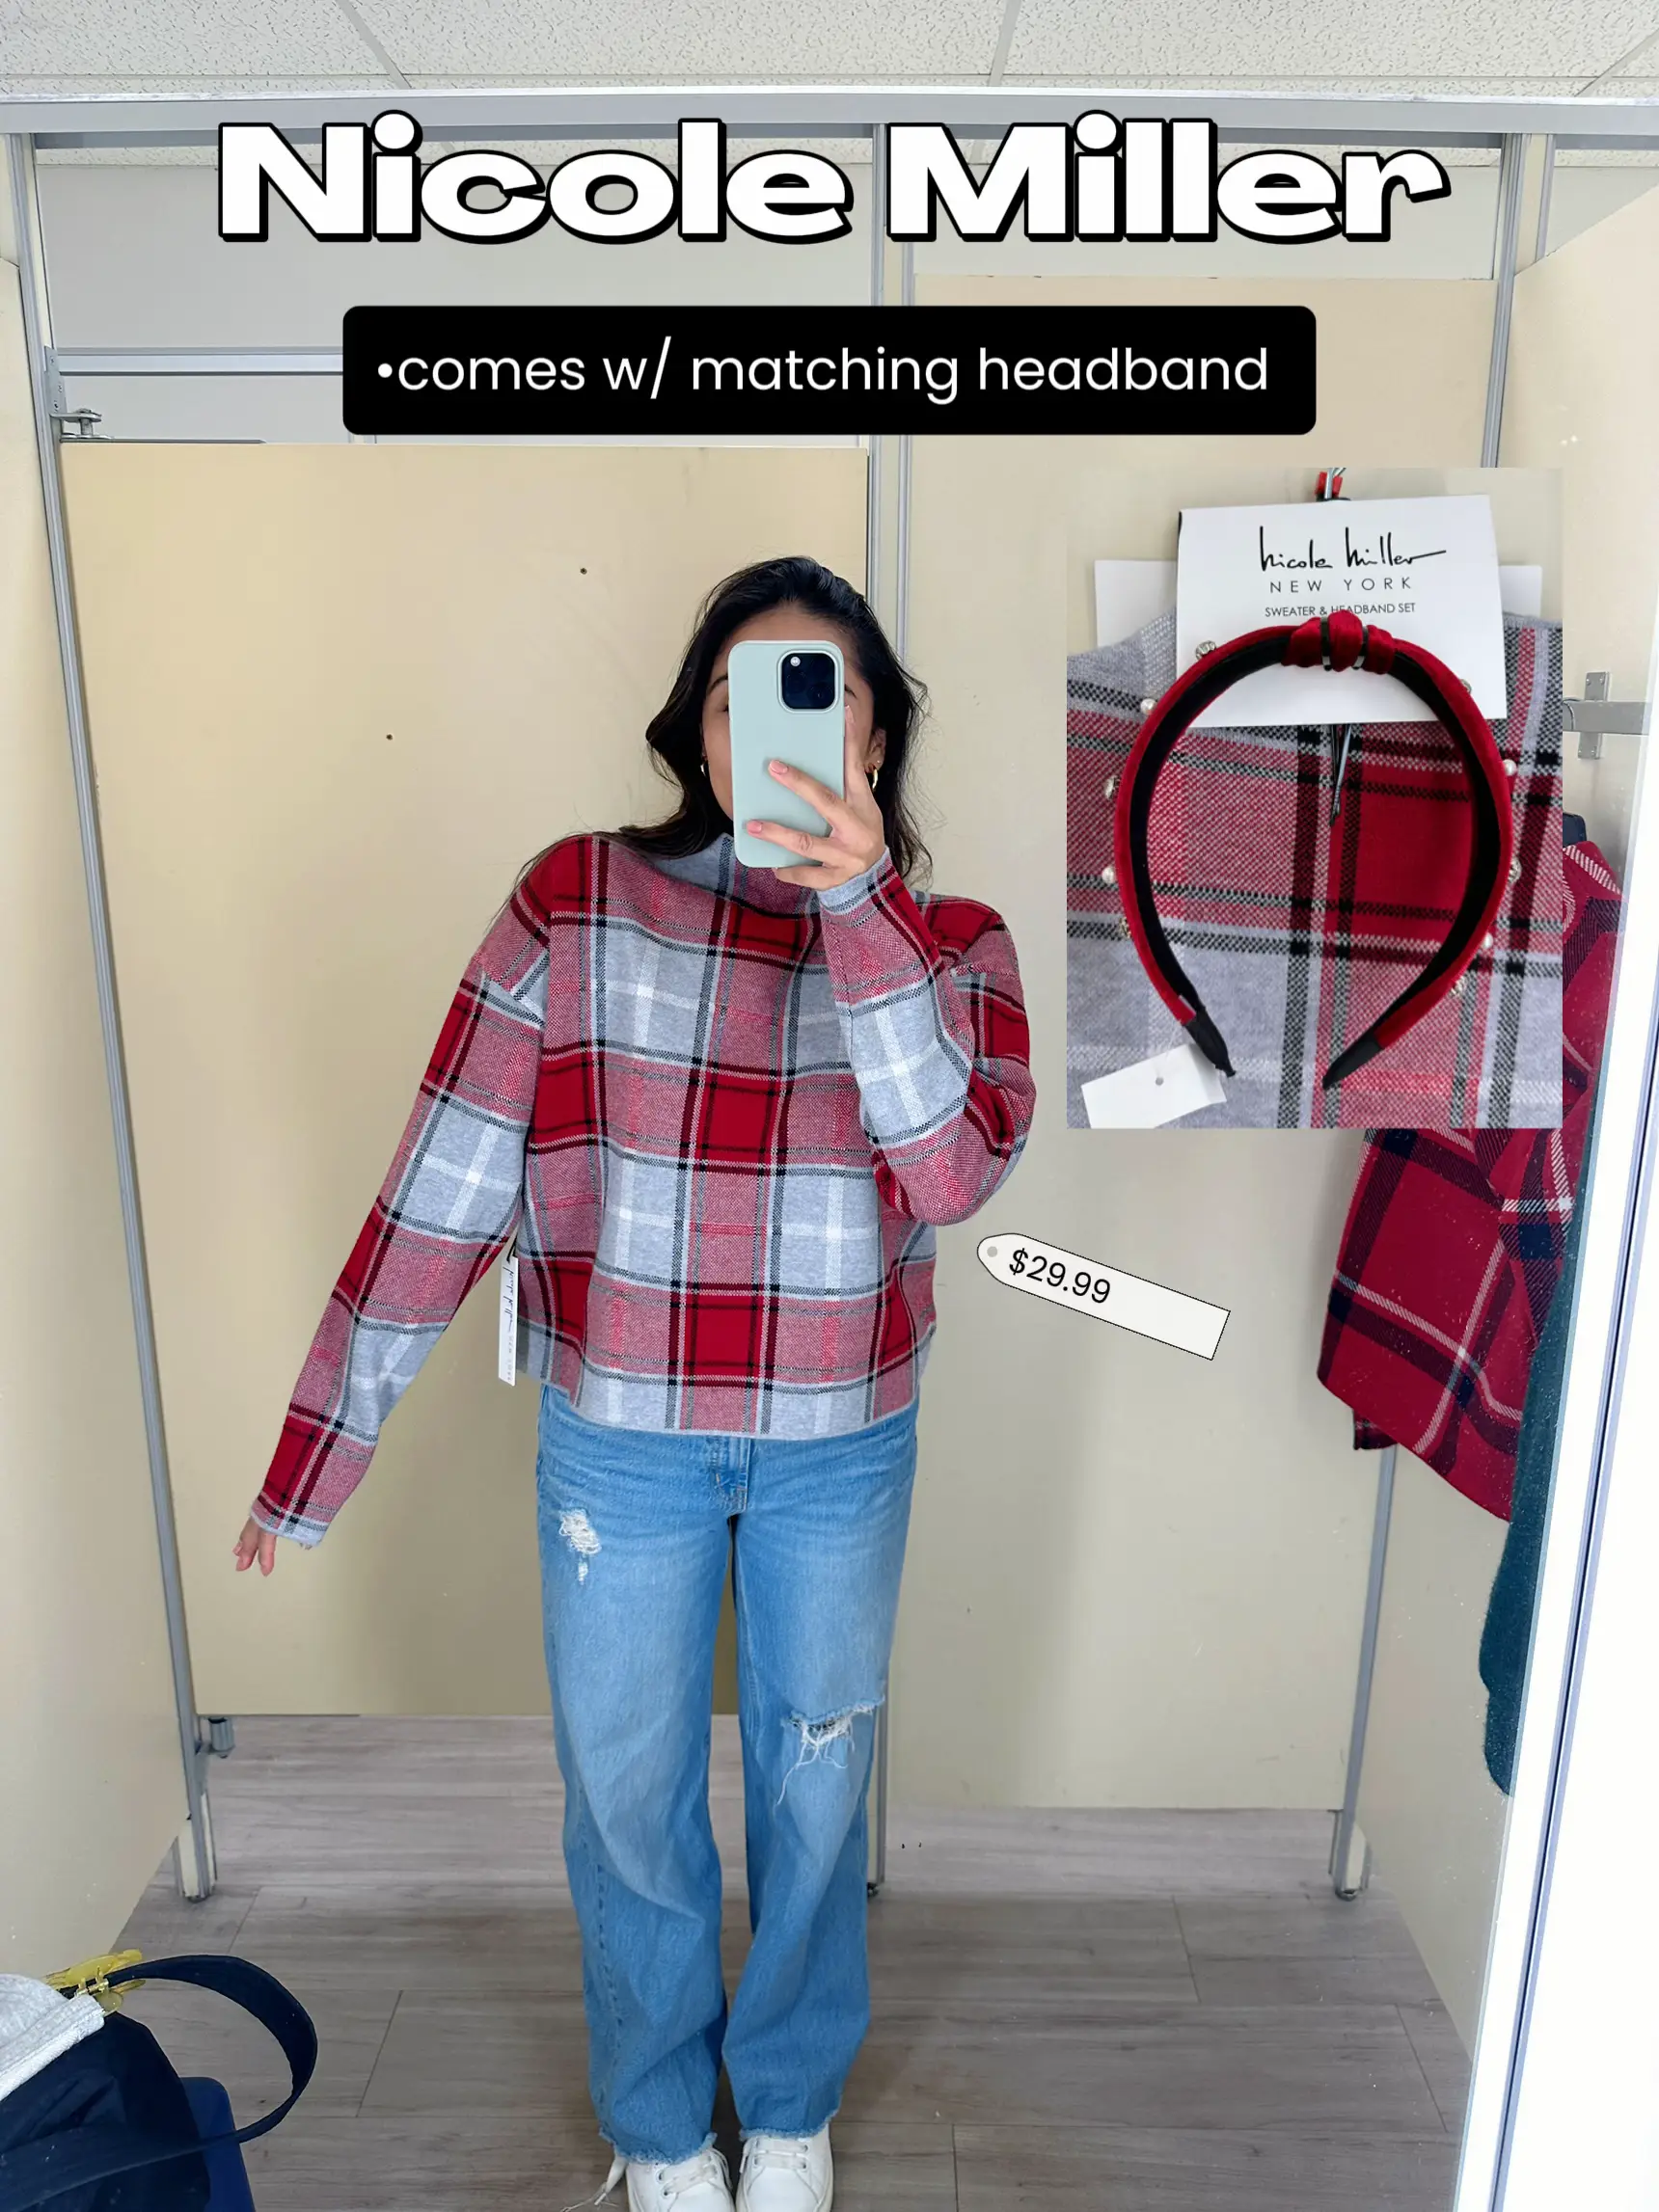  A woman taking a selfie in a store with a plaid sweater and a headband.